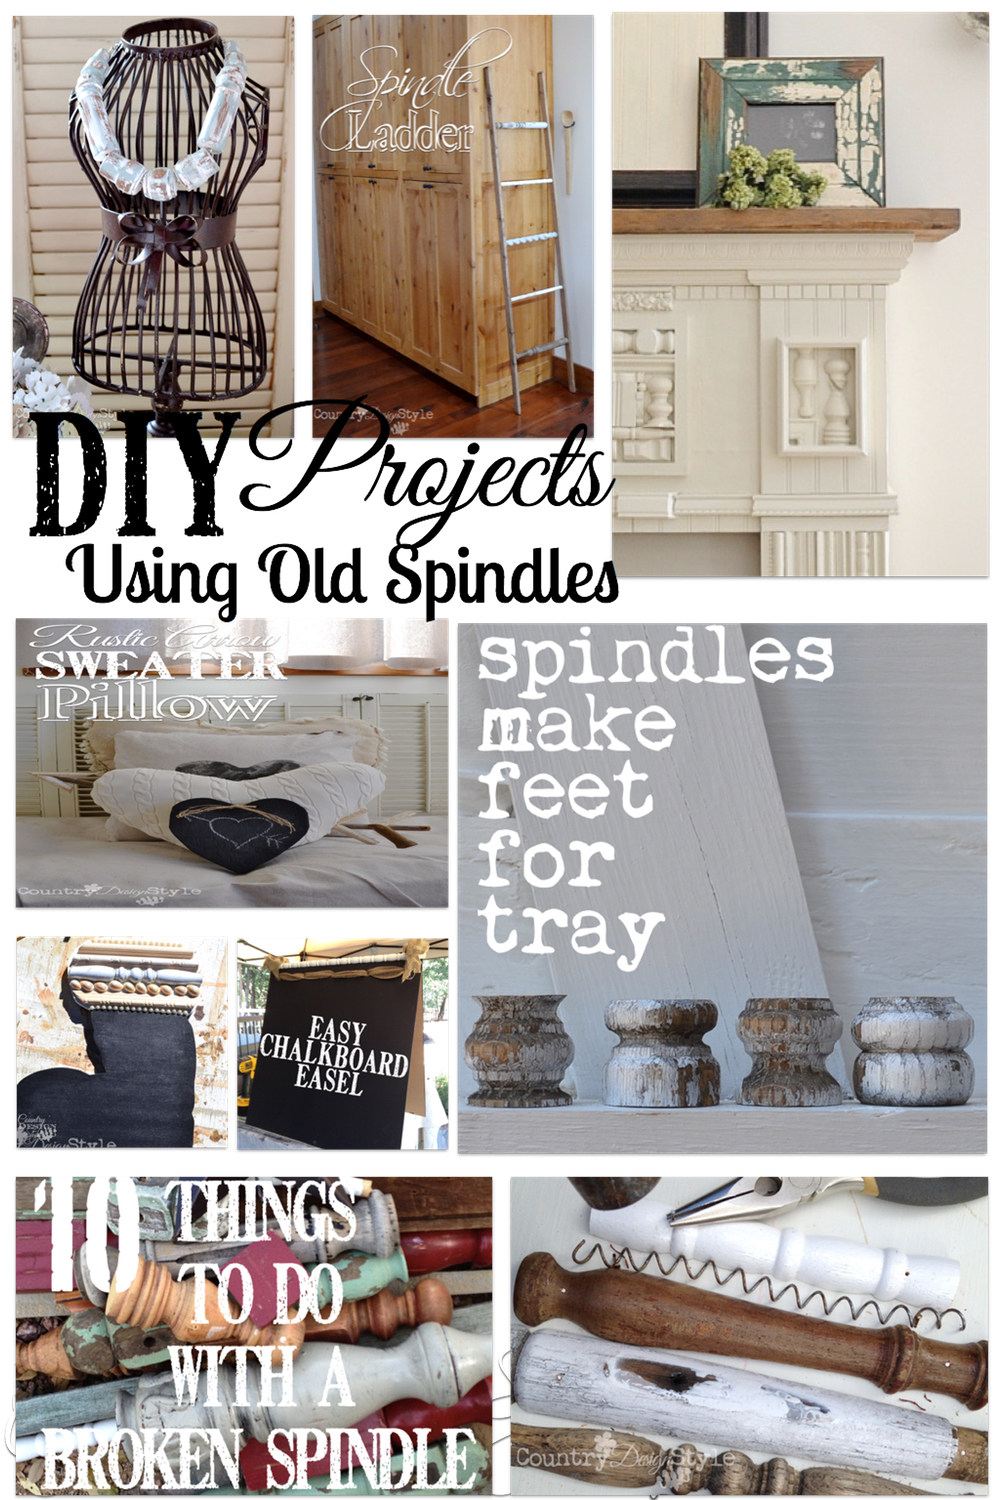 A collection of DIY projects using old spindles.  WAIT did I just read SPINDLES??  Yes, spindles are a creative way to add farmhouse style to any home.  Country Design Style